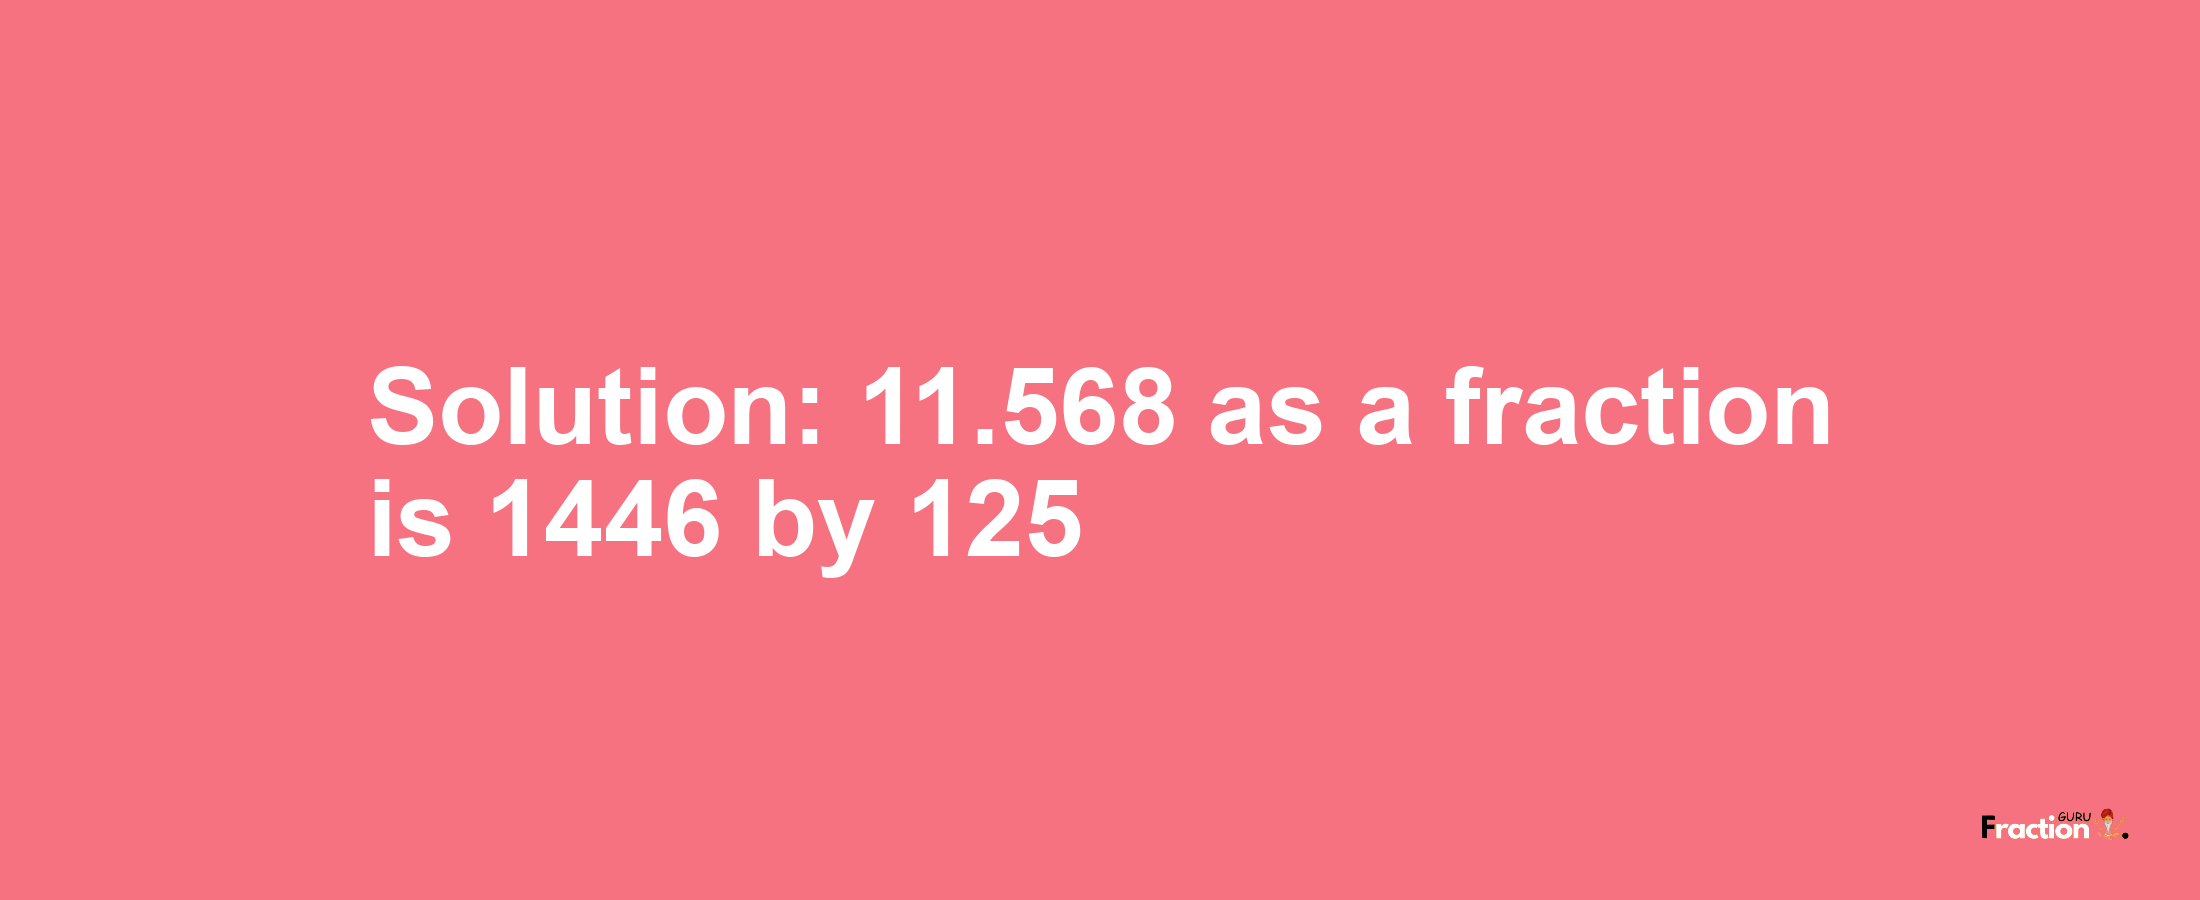 Solution:11.568 as a fraction is 1446/125